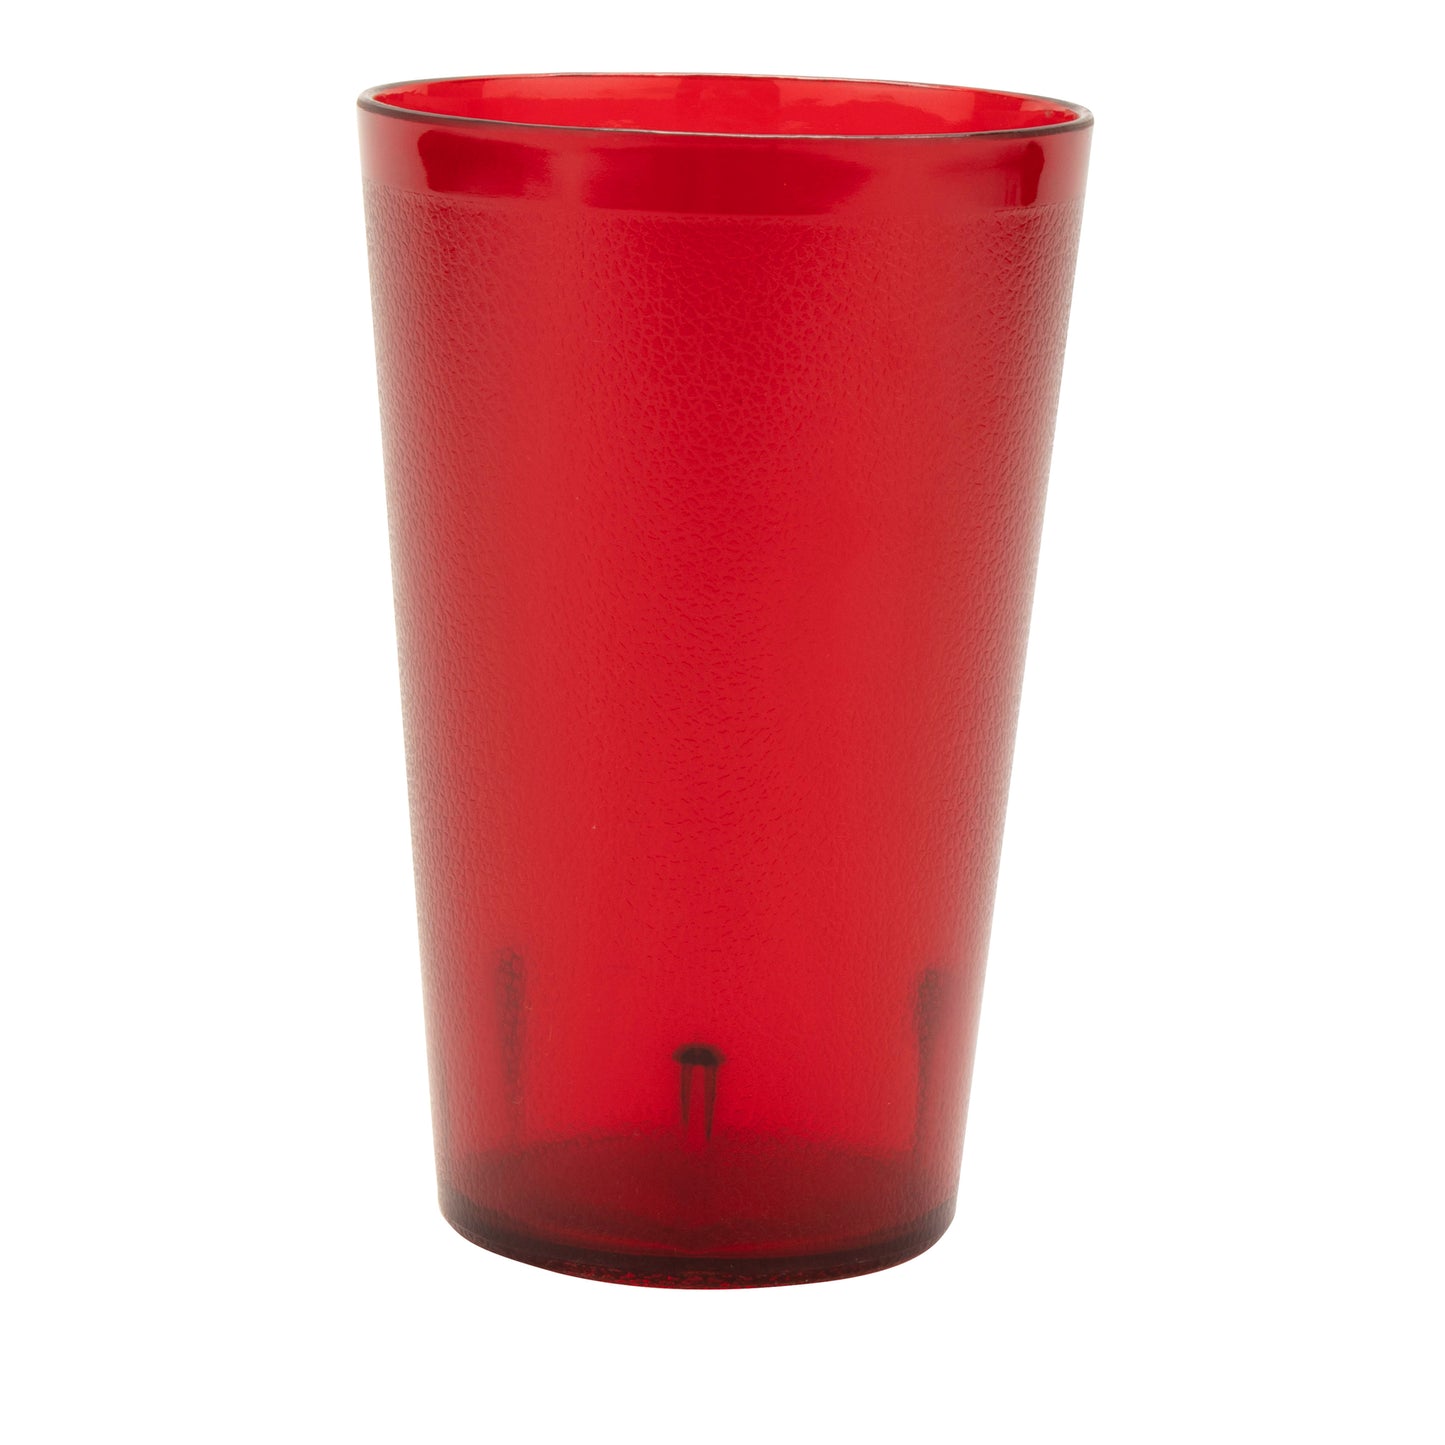 SAN Tumbler 32 Ounce - Red (12 Pack)